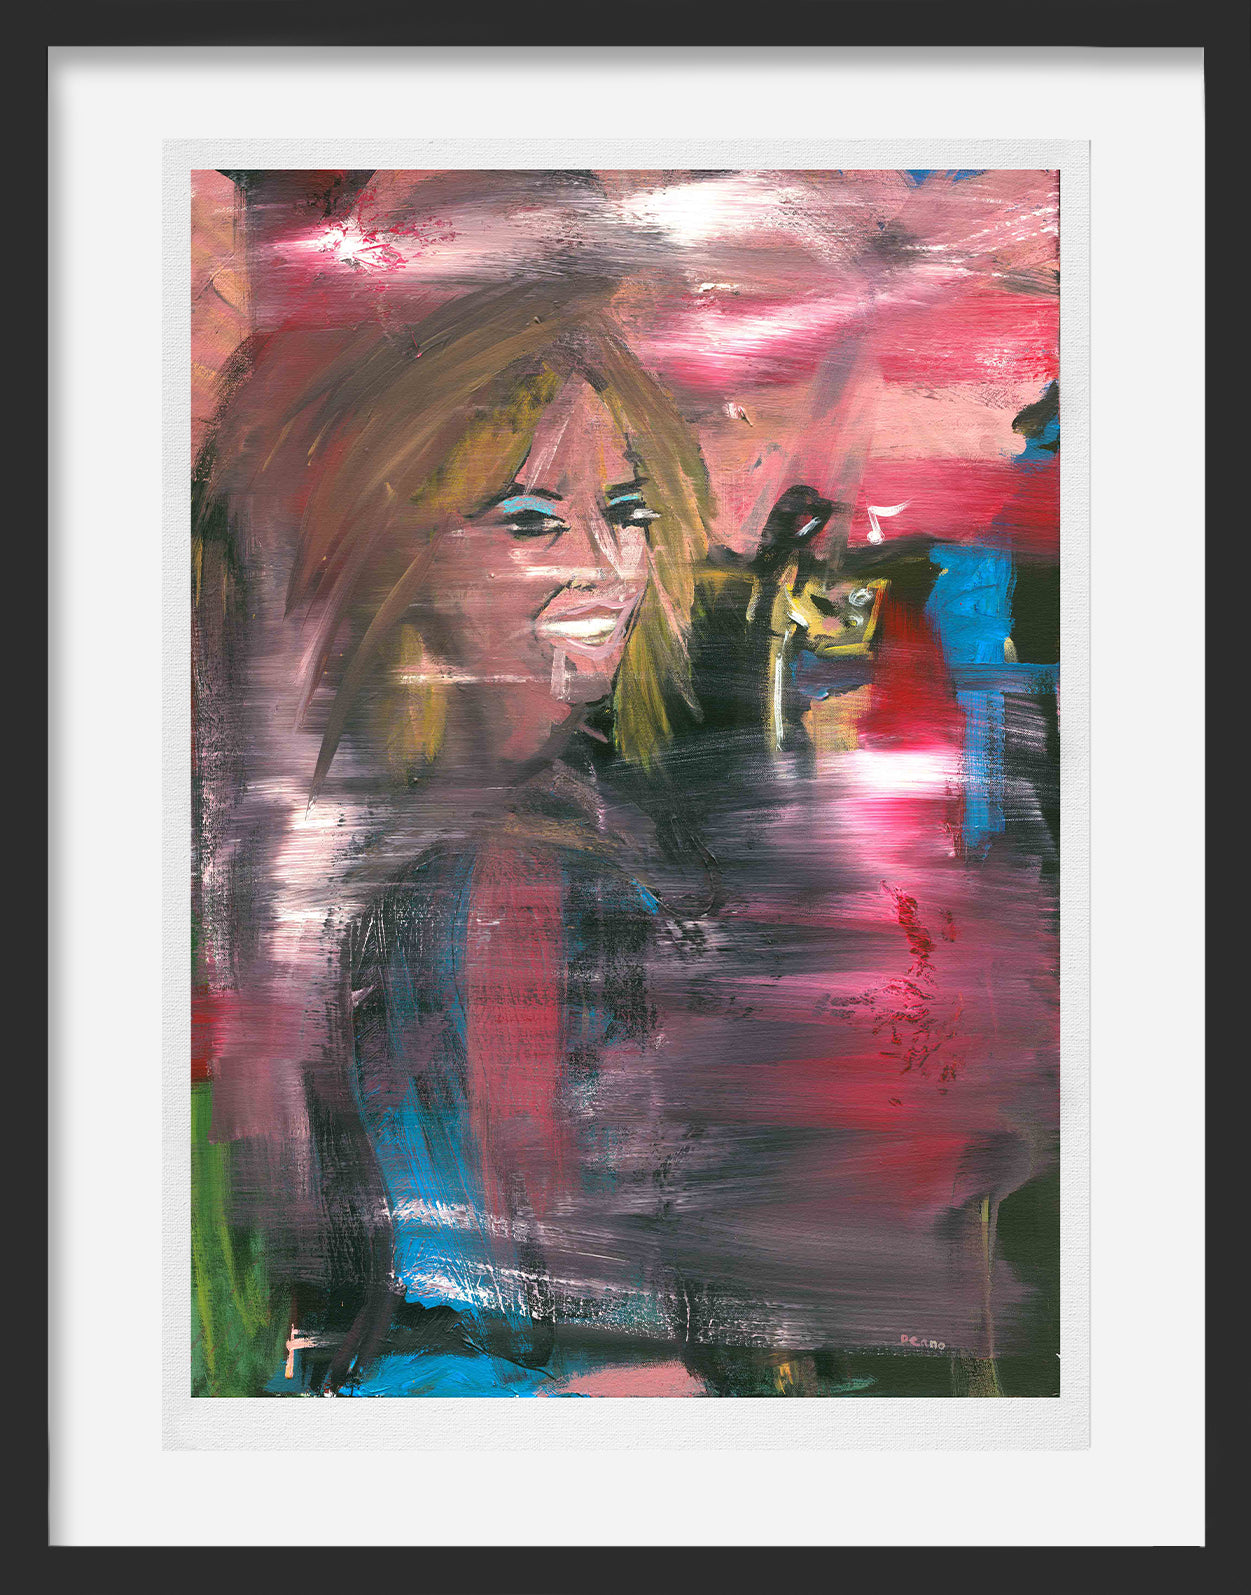 A limited edition abstract print featuring a smiling DJ surrounded by a vibrant and blurred club scene in bright pinks and blues.